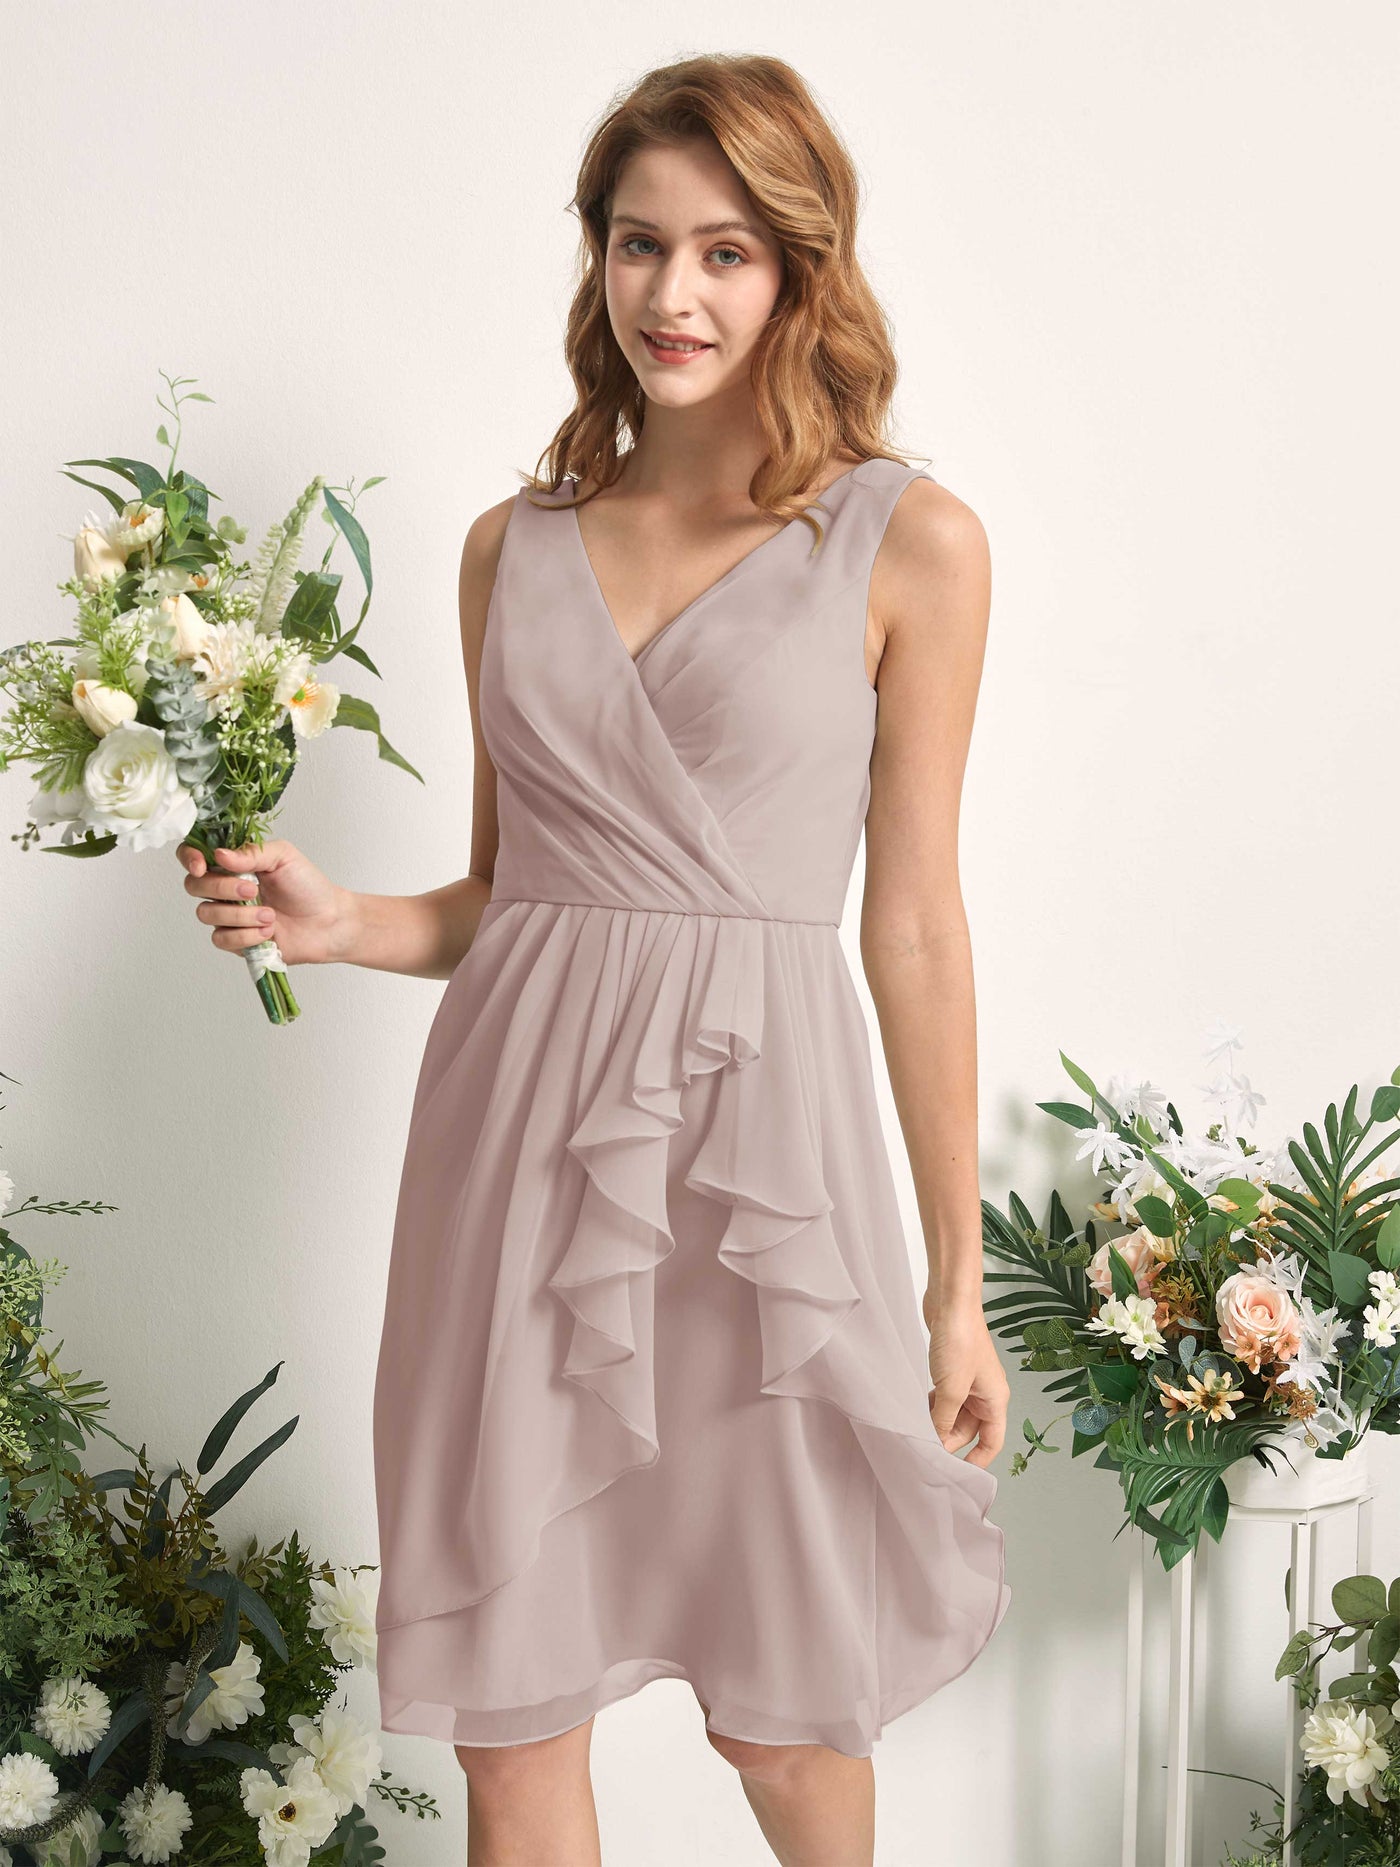 Bridesmaid Dress A-line Chiffon Straps Knee Length Sleeveless Wedding Party Dress - Taupe (81226624)#color_taupe